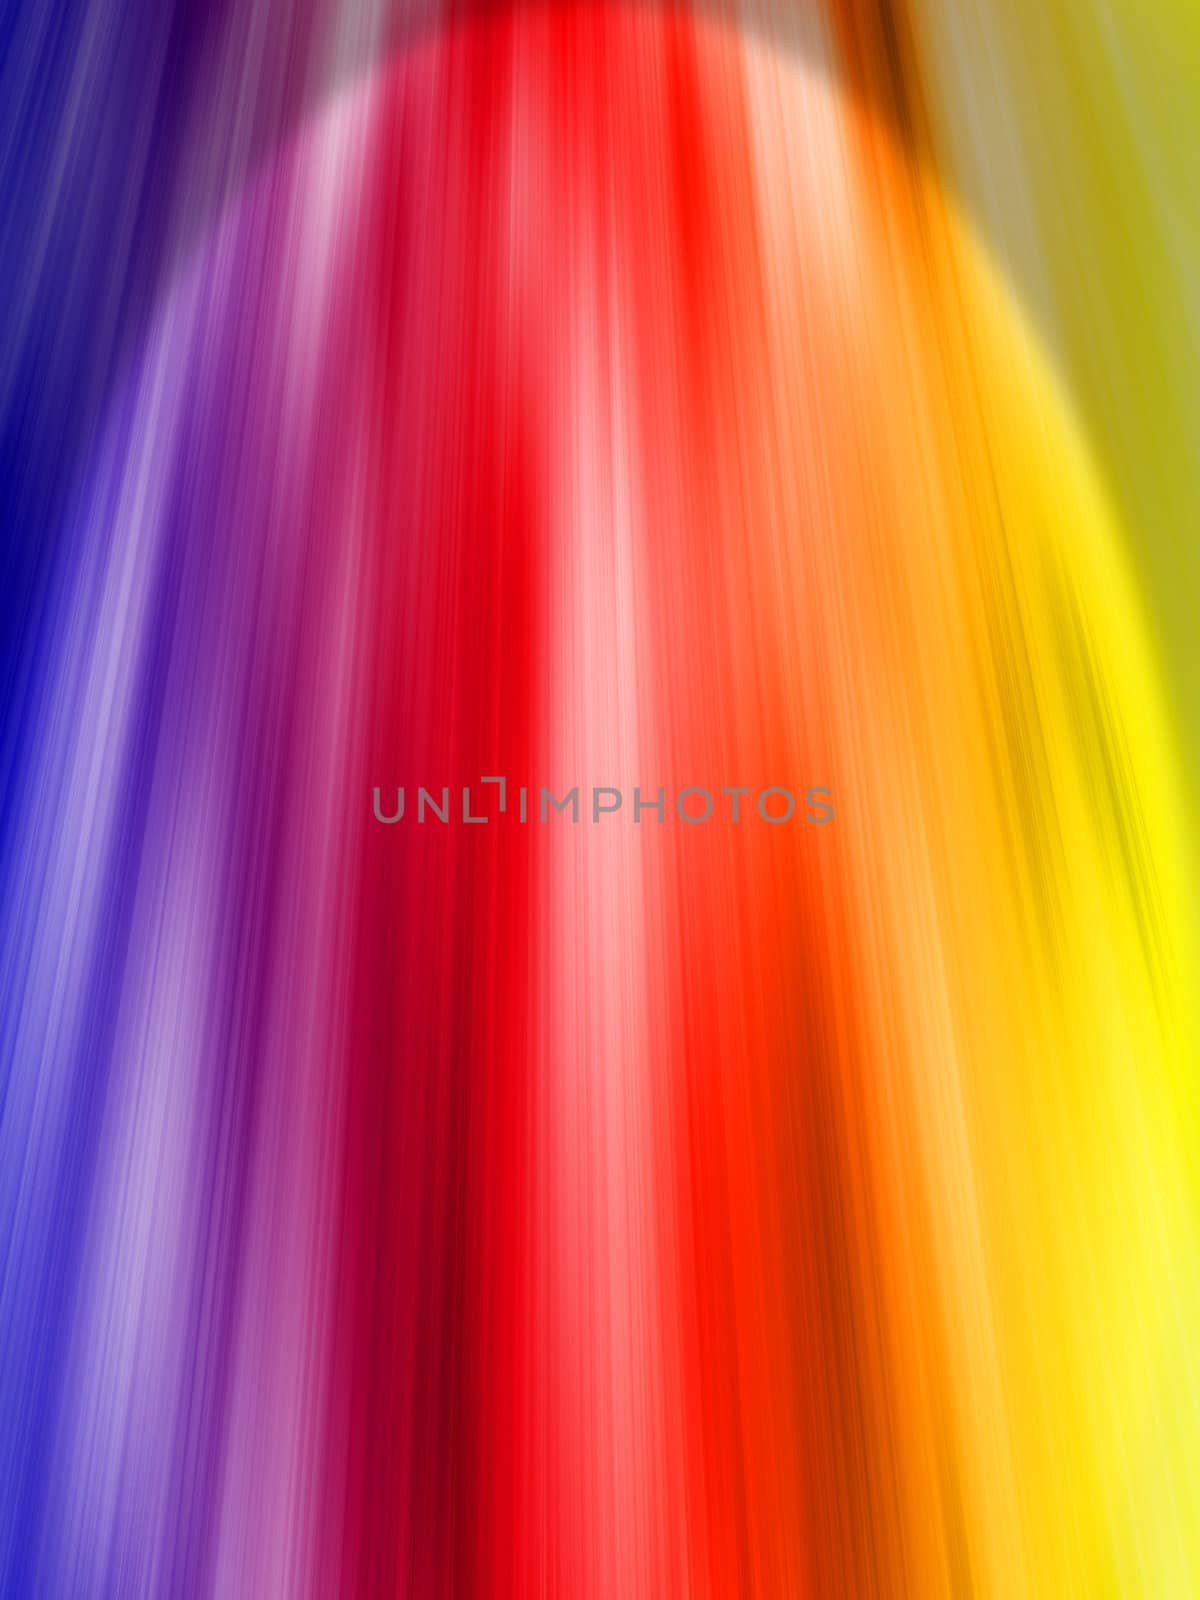 Abstract background with rainbow coloured curtin and spot light